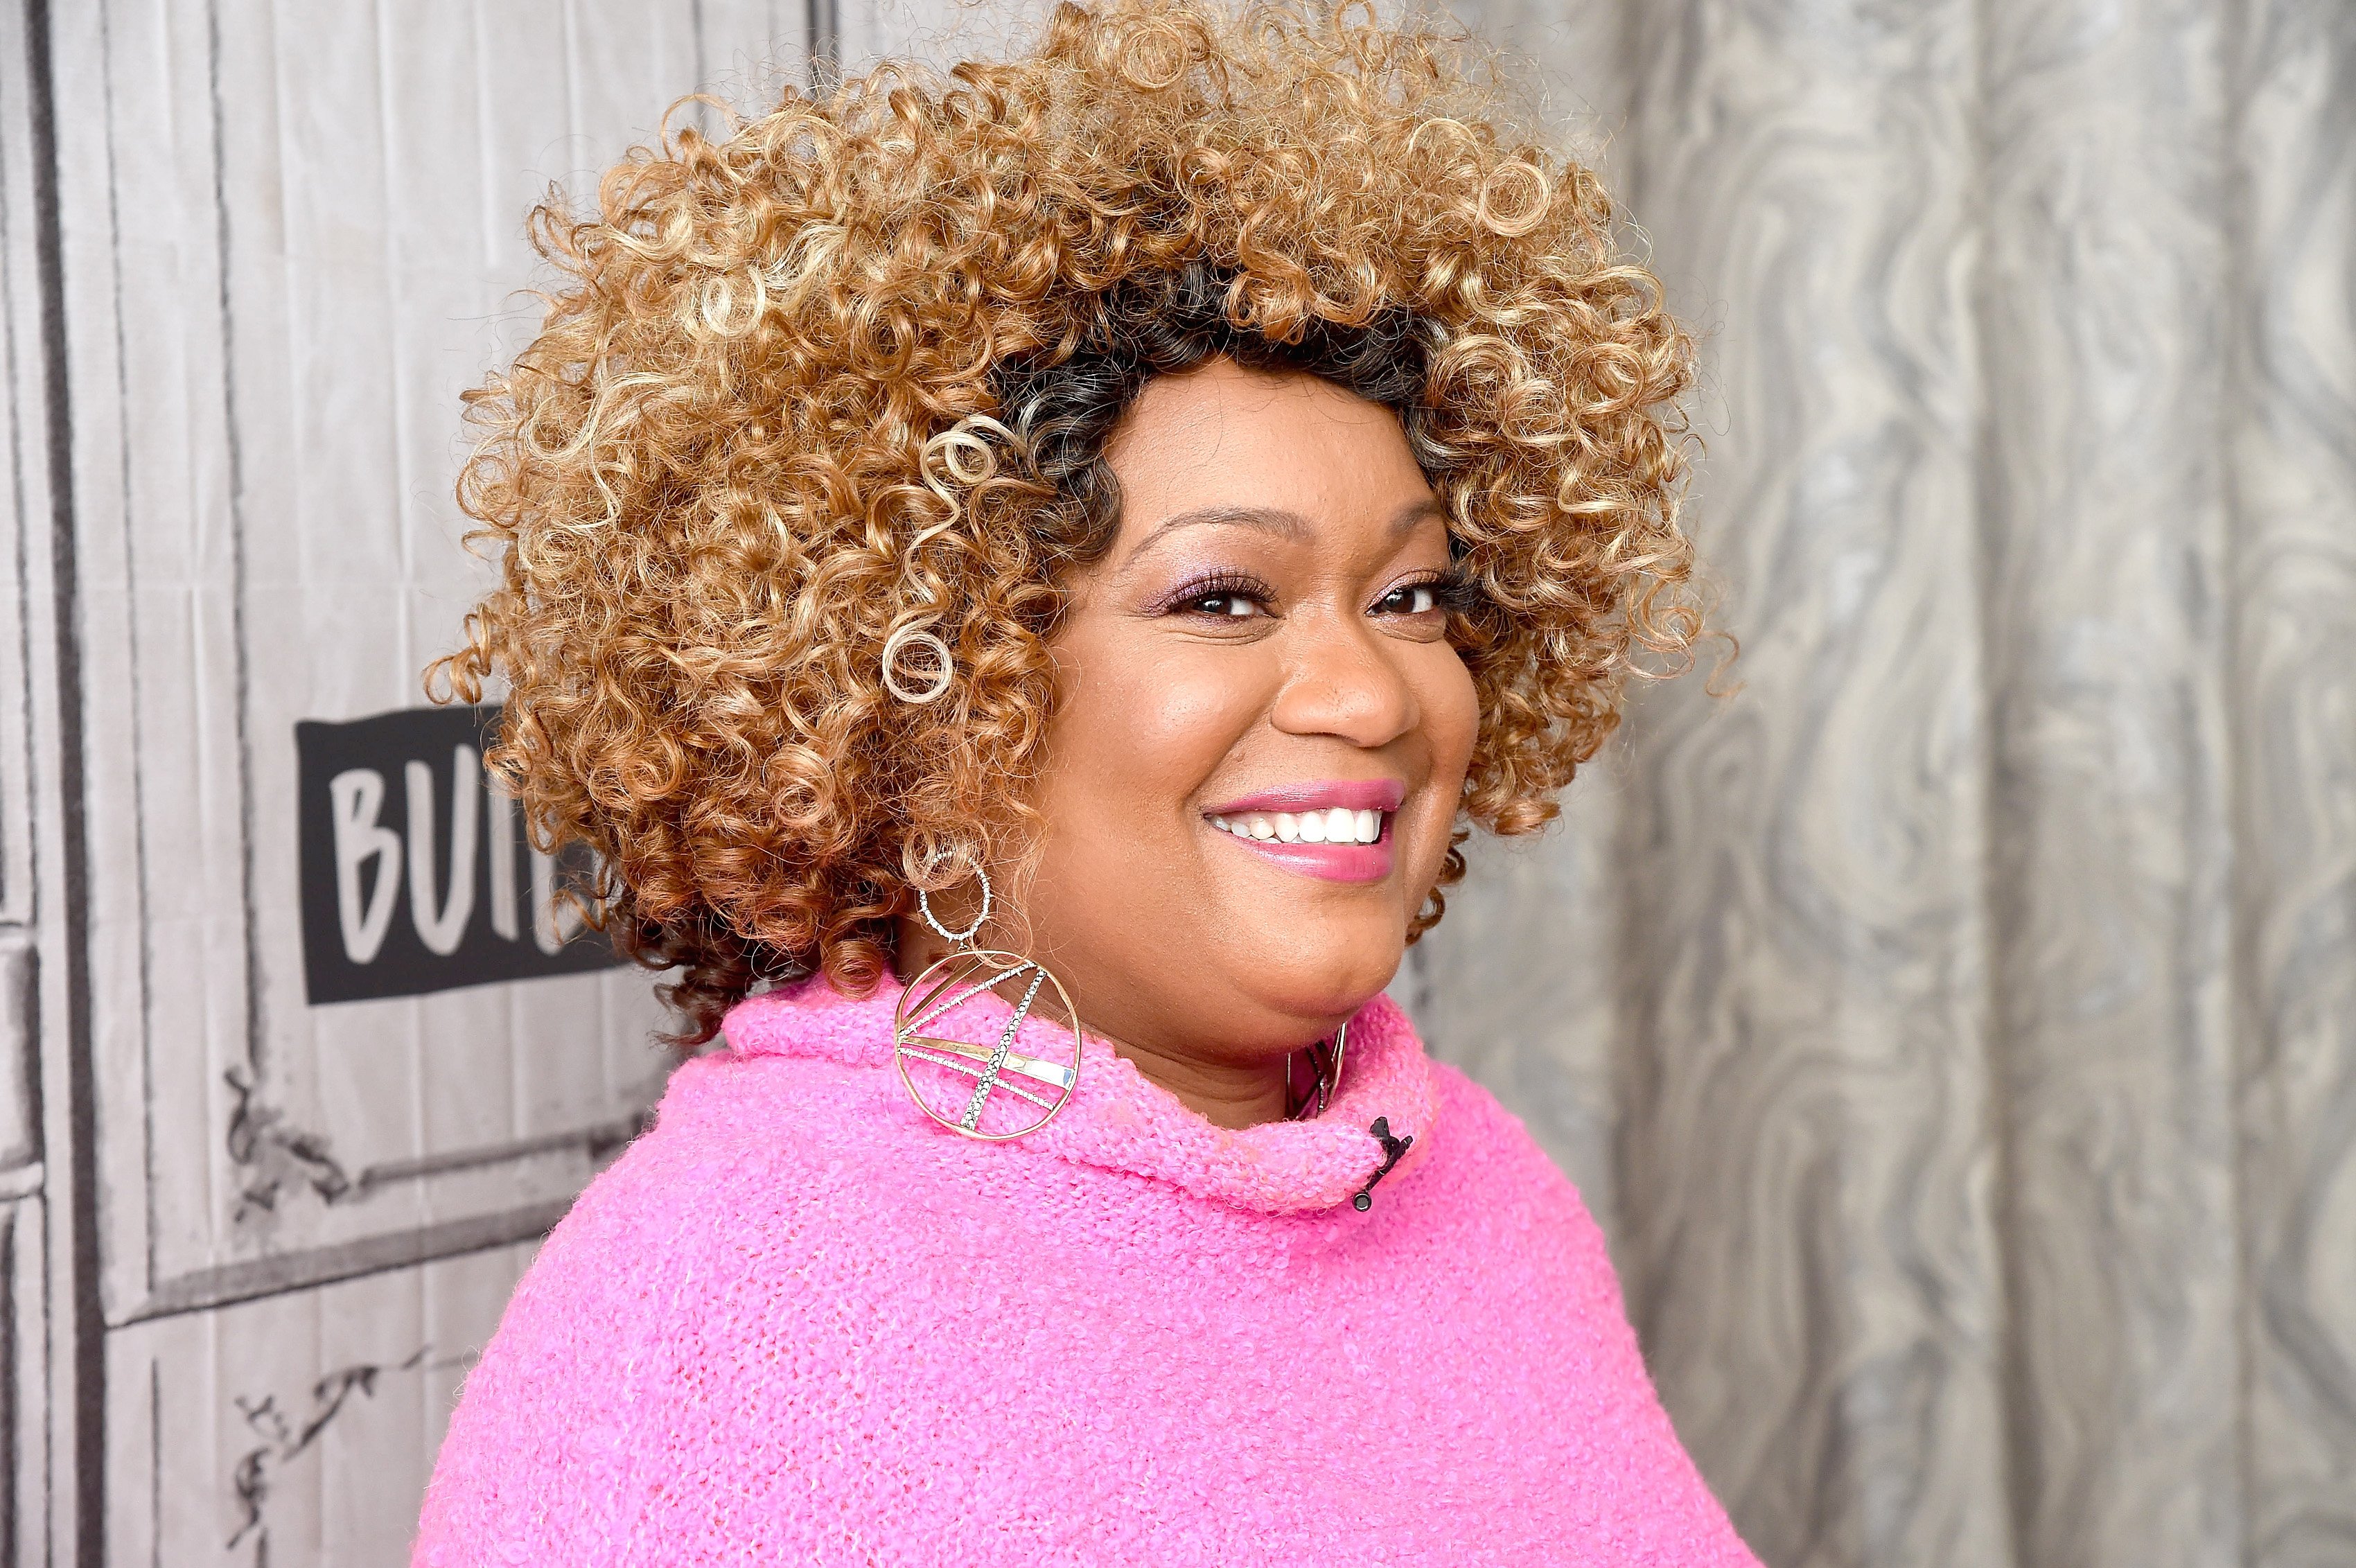 Food Network's Sunny Anderson in a bright pink sweater.